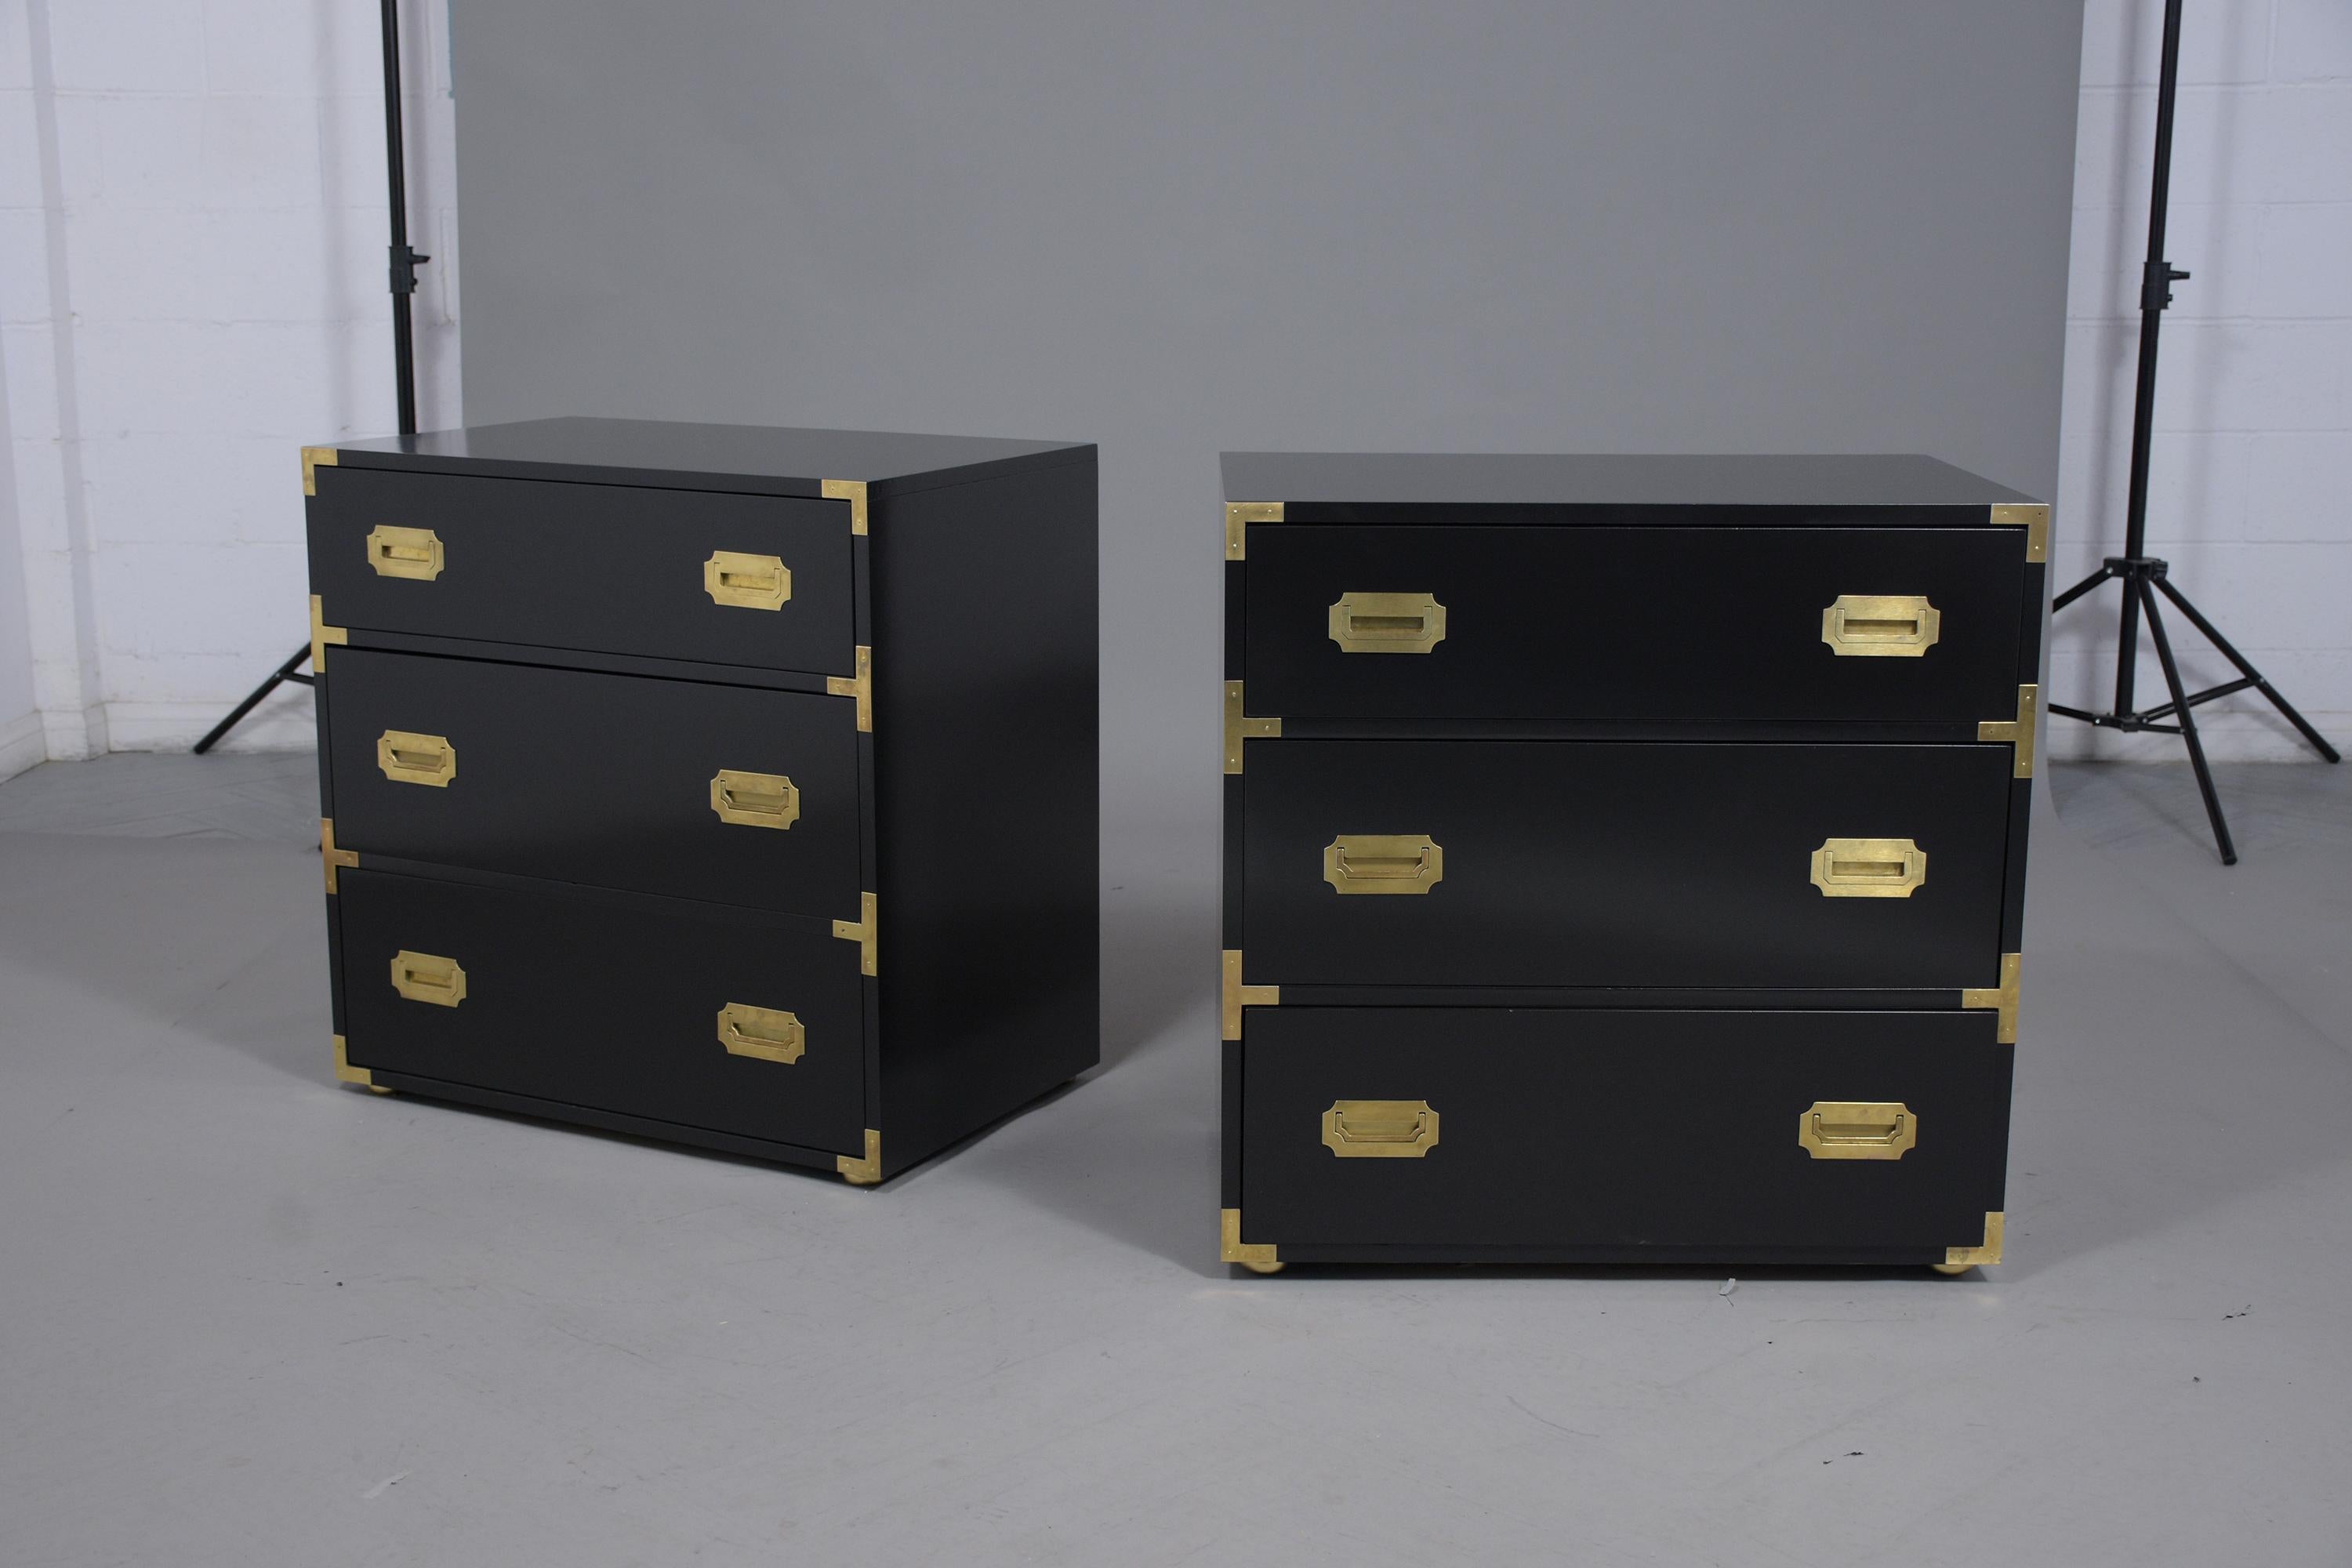 Elegant pair of vintage mid-century three-drawer dressers has been professionally restored and painted in rich black color with a lacquered finish. These fabulous dressers come with brass accents on all corners and have their original brass handles